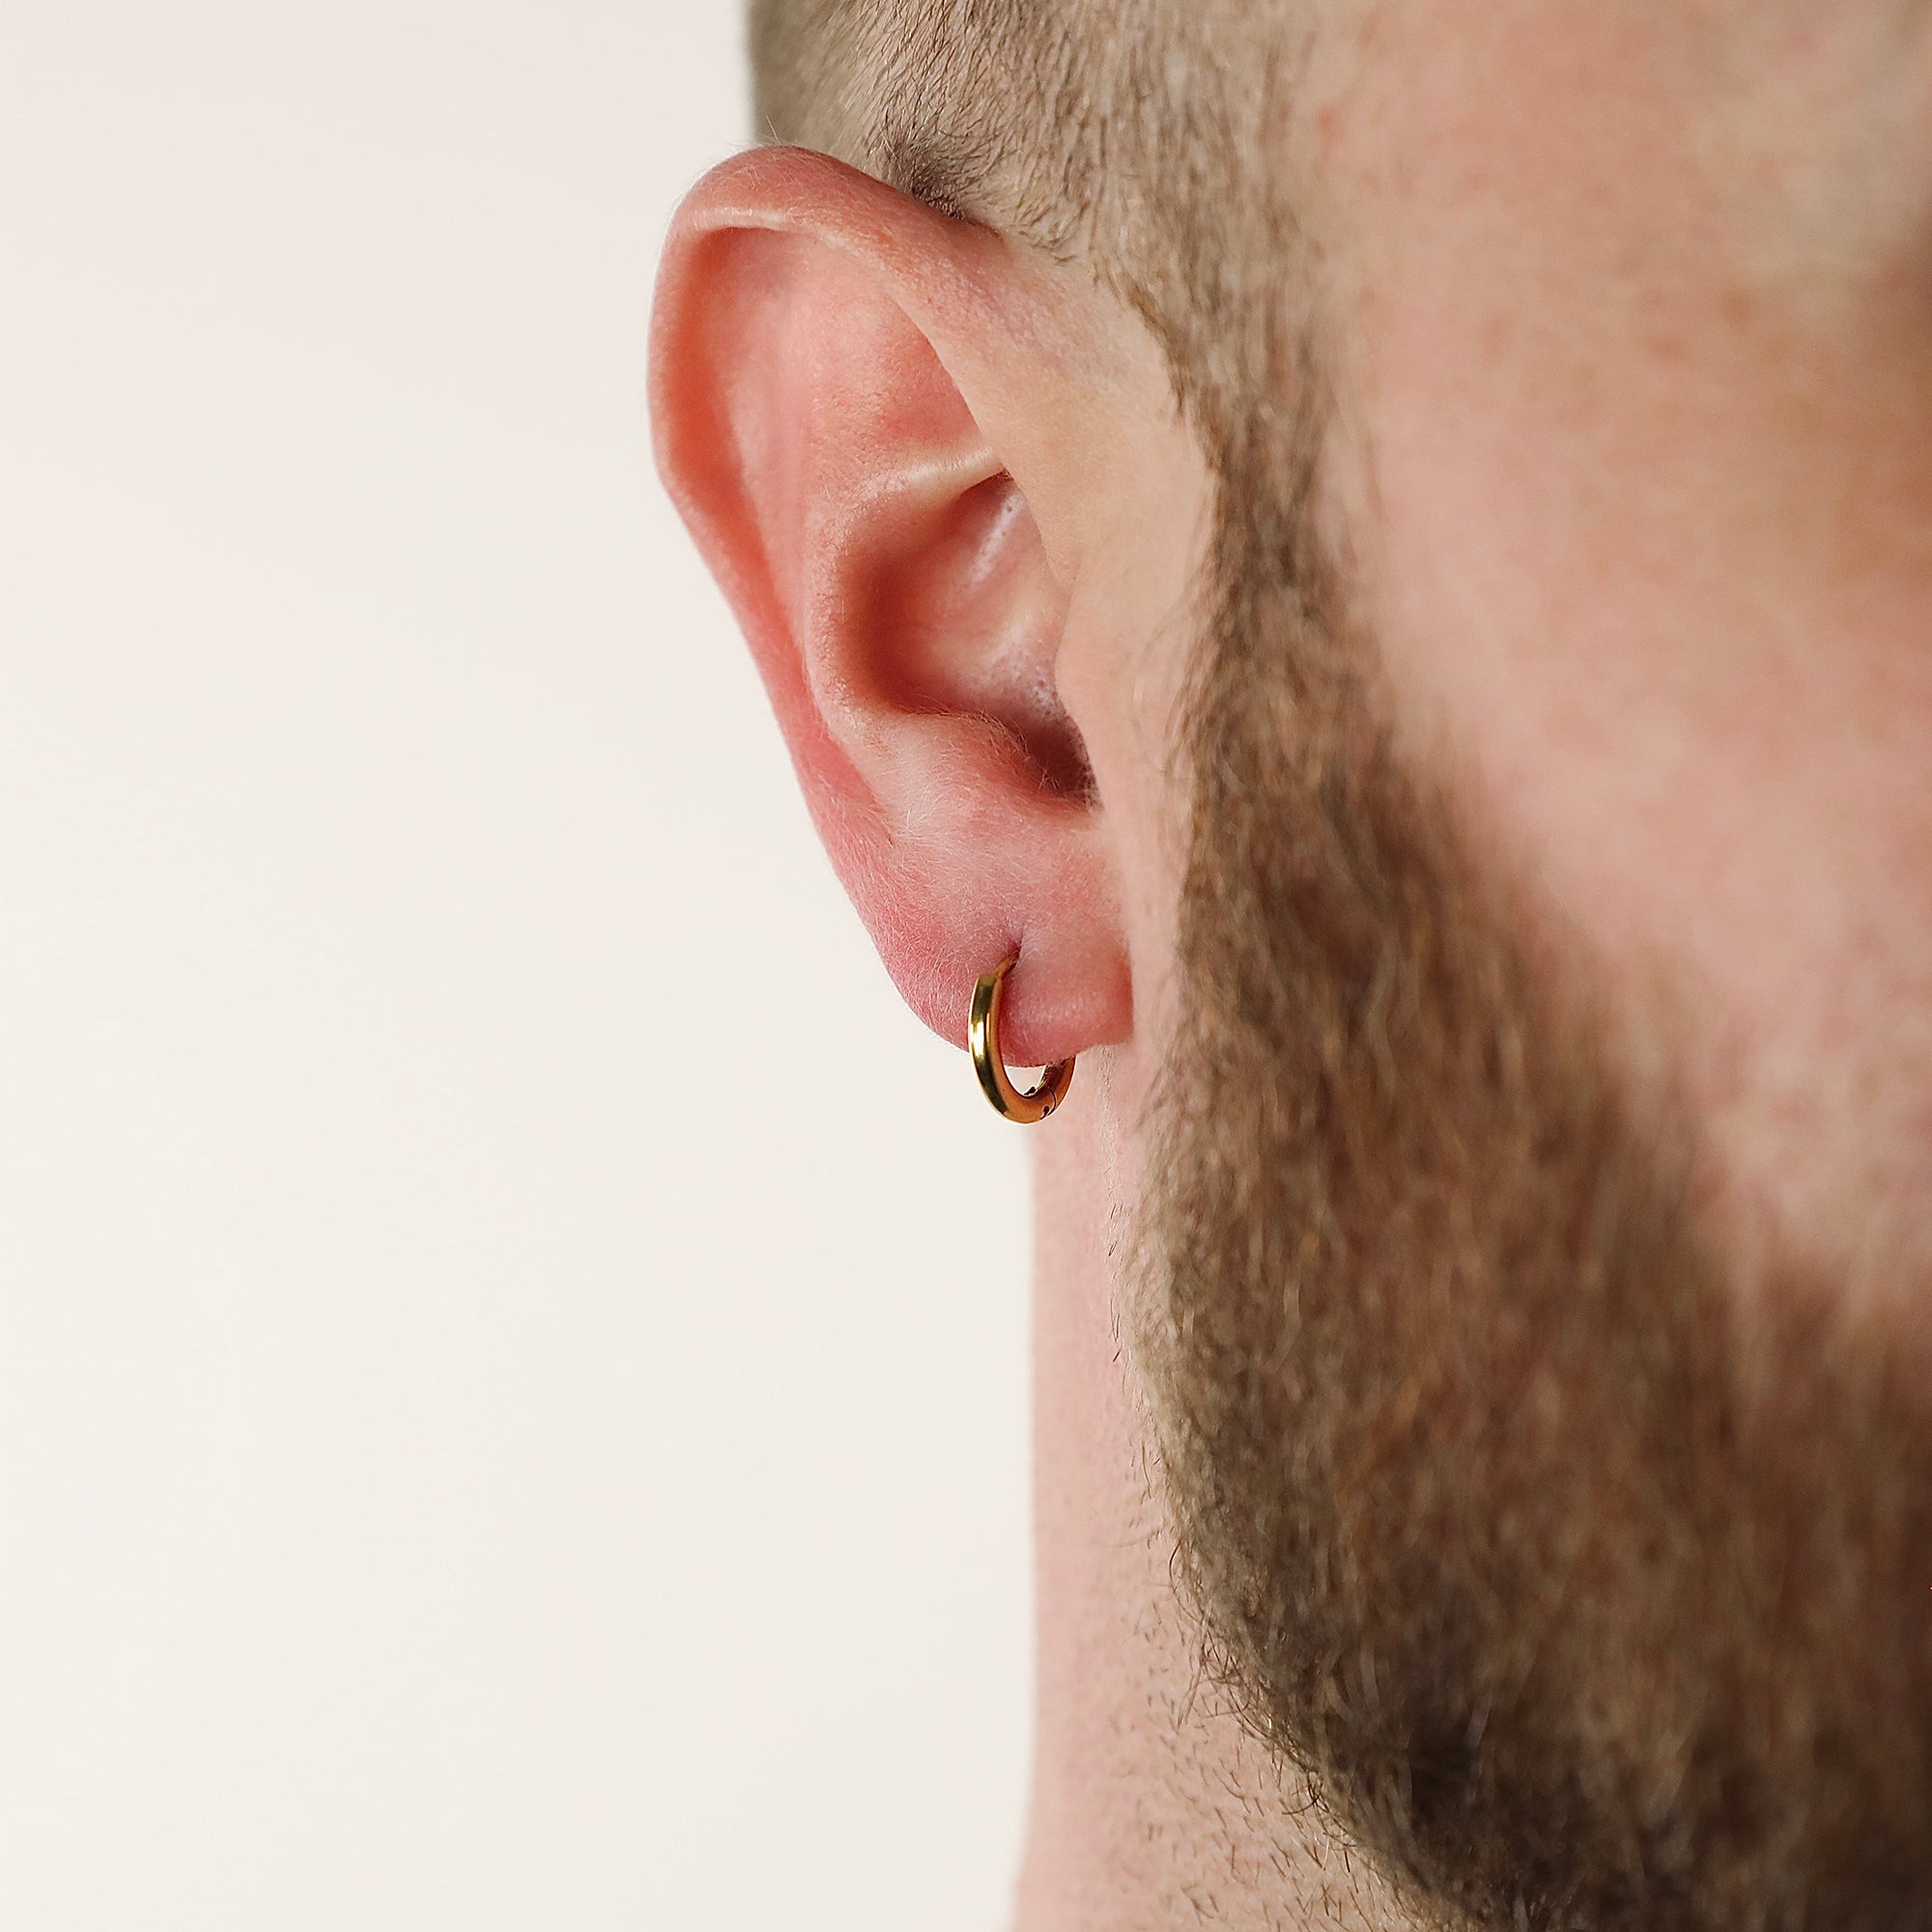 Minimal Round Earring - 2mm Gold